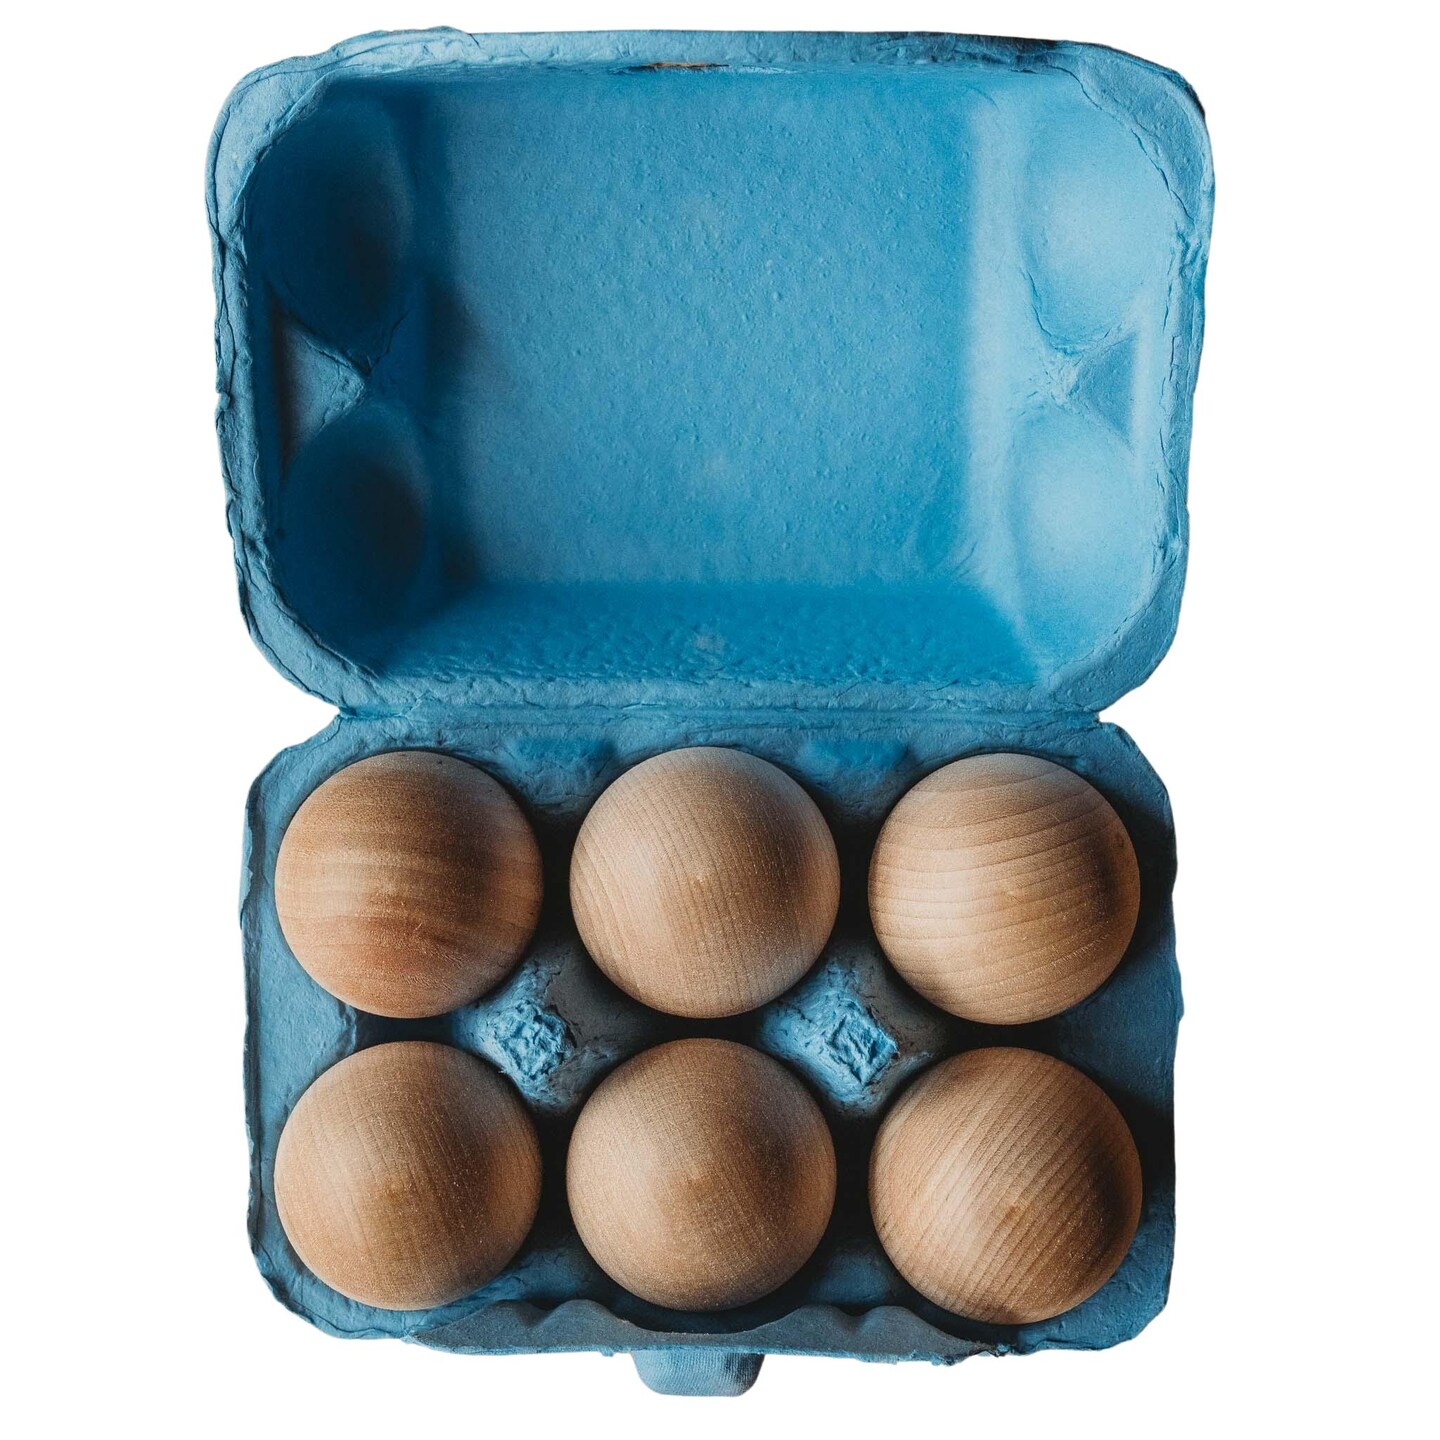 Bella Luna Wooden Easter Eggs in Carton (Made in the USA)